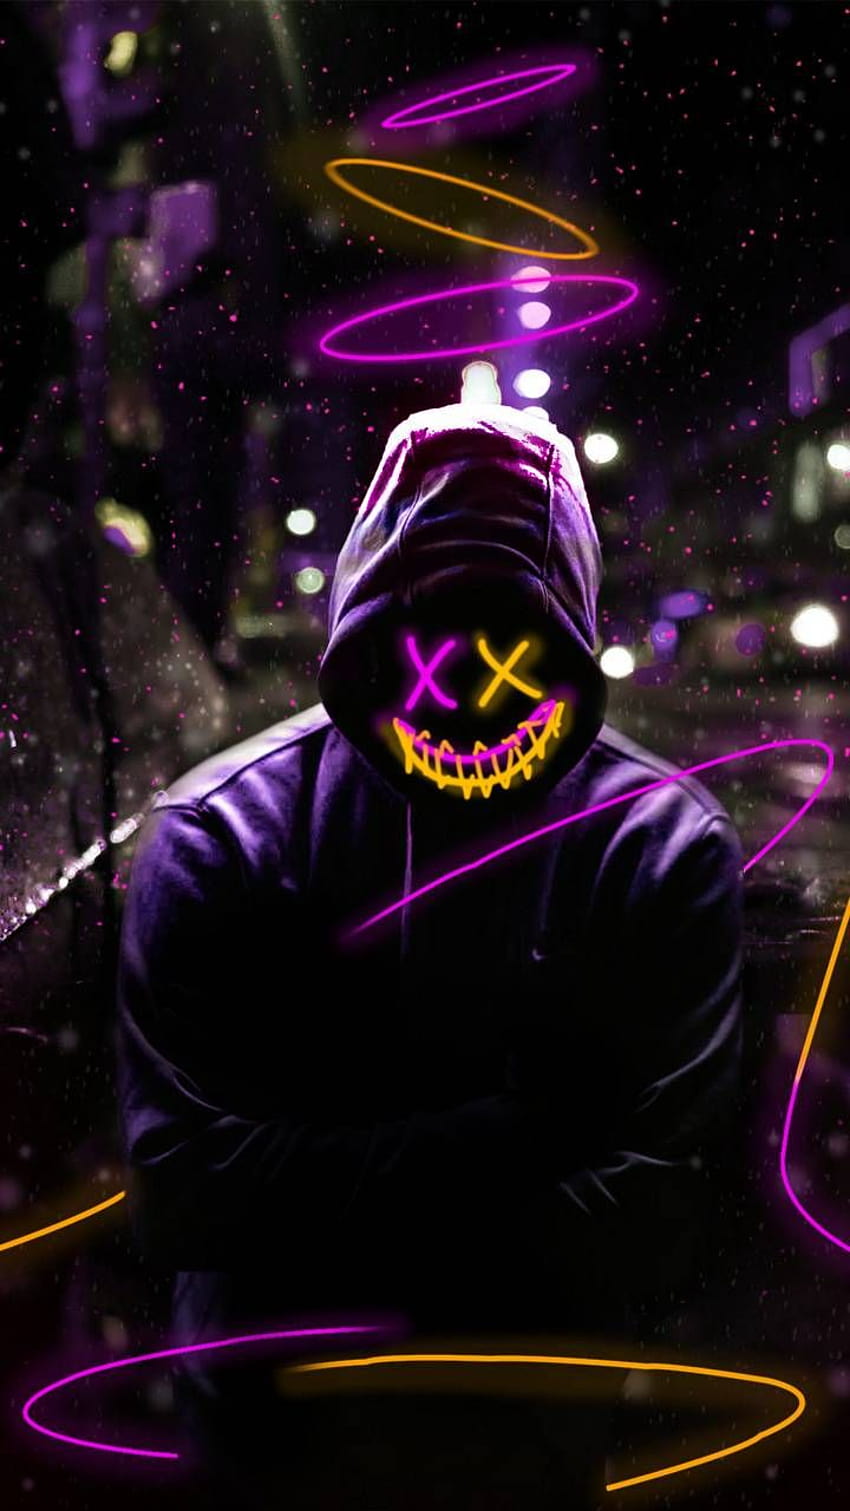 Attitude led mask guy dpz ptofile pic in 2021, led 2021 HD phone wallpaper